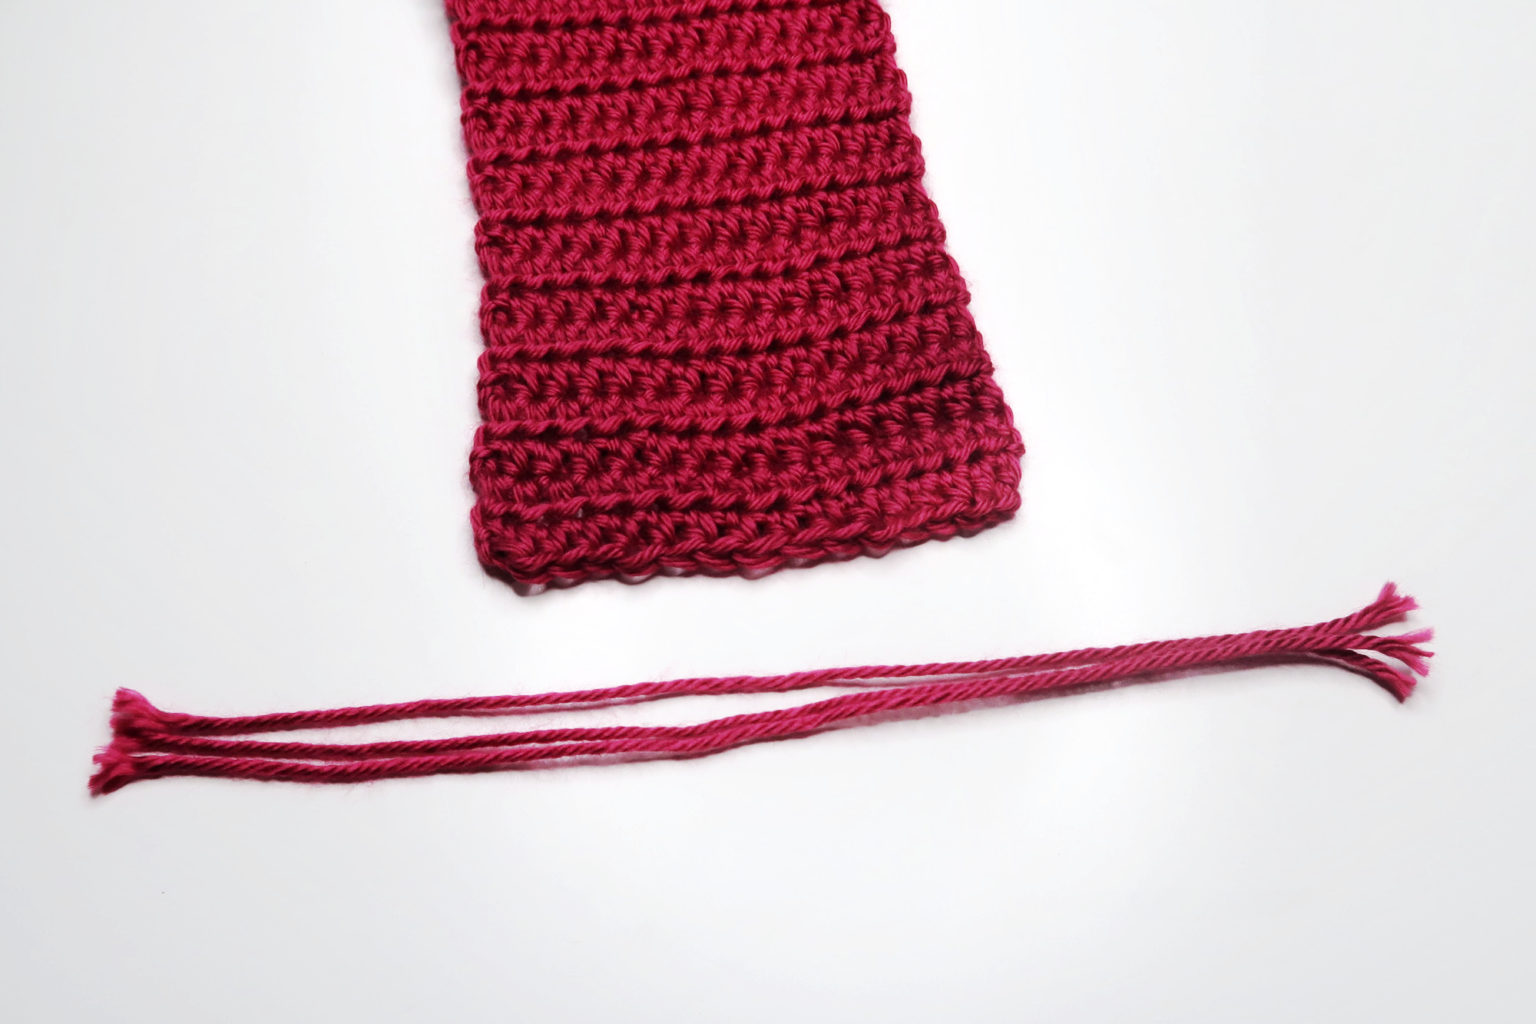 Simple Half Double Crochet Scarf - Looped and Knotted